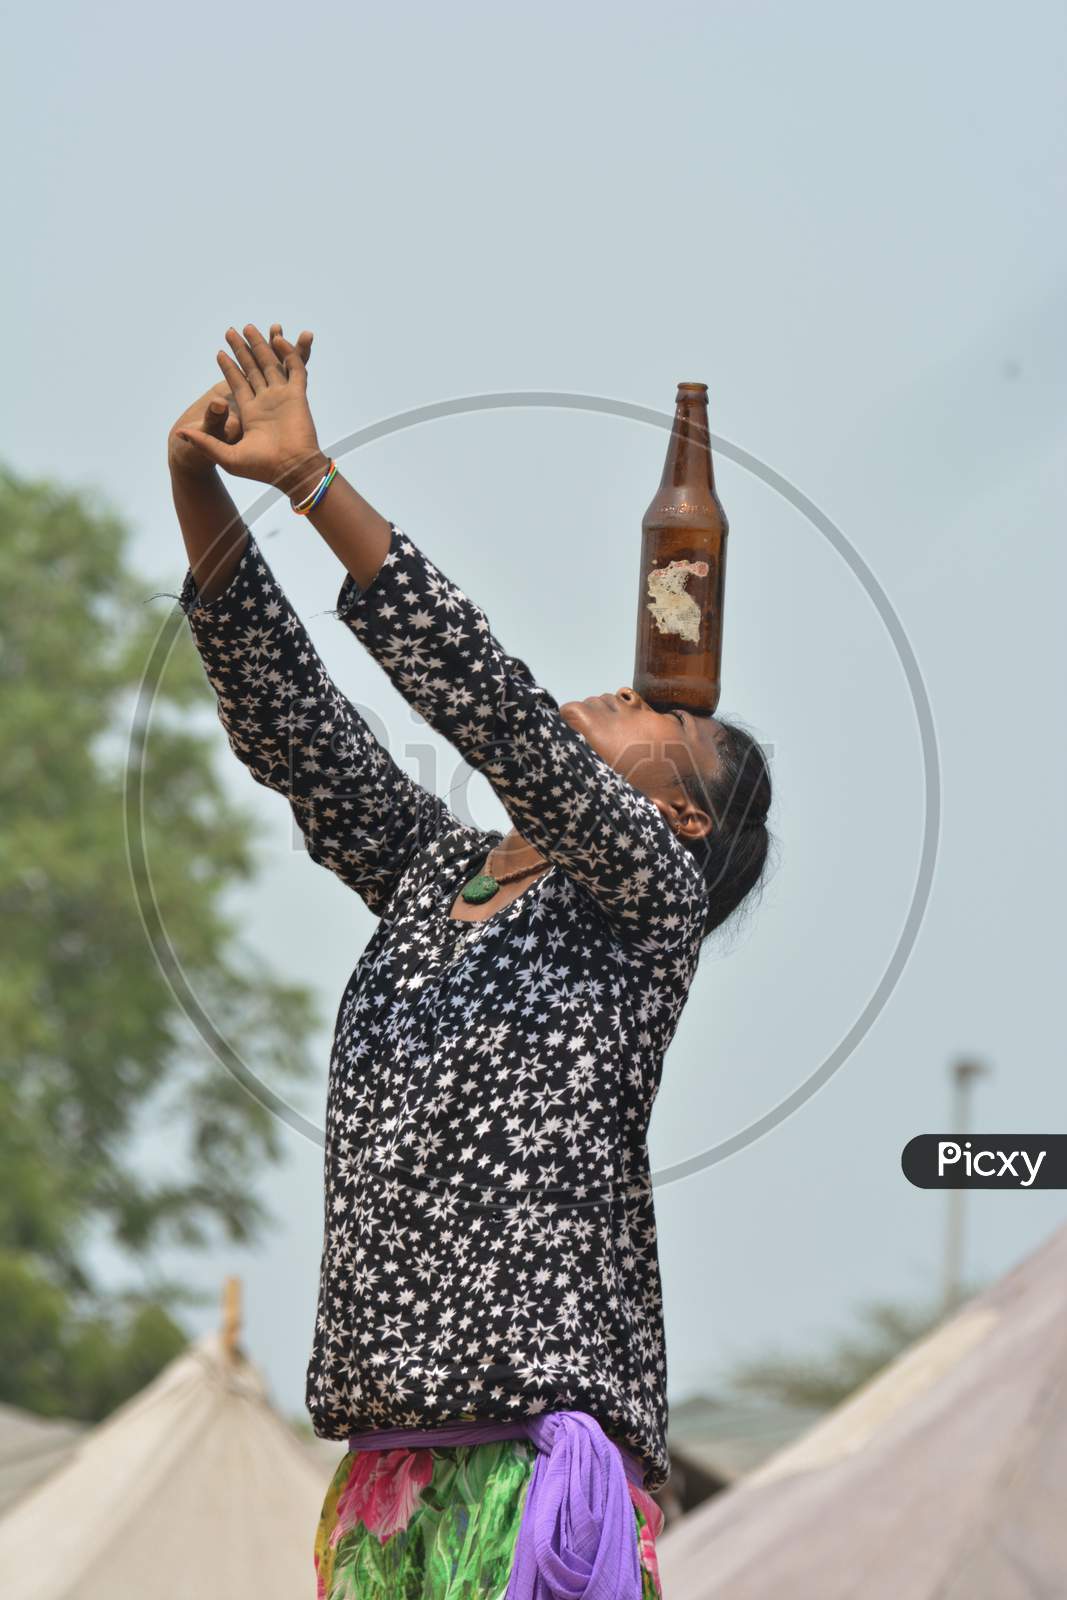 Girl Balancing Bottle On Head Performing Balancing Trick In Public For Earning Money